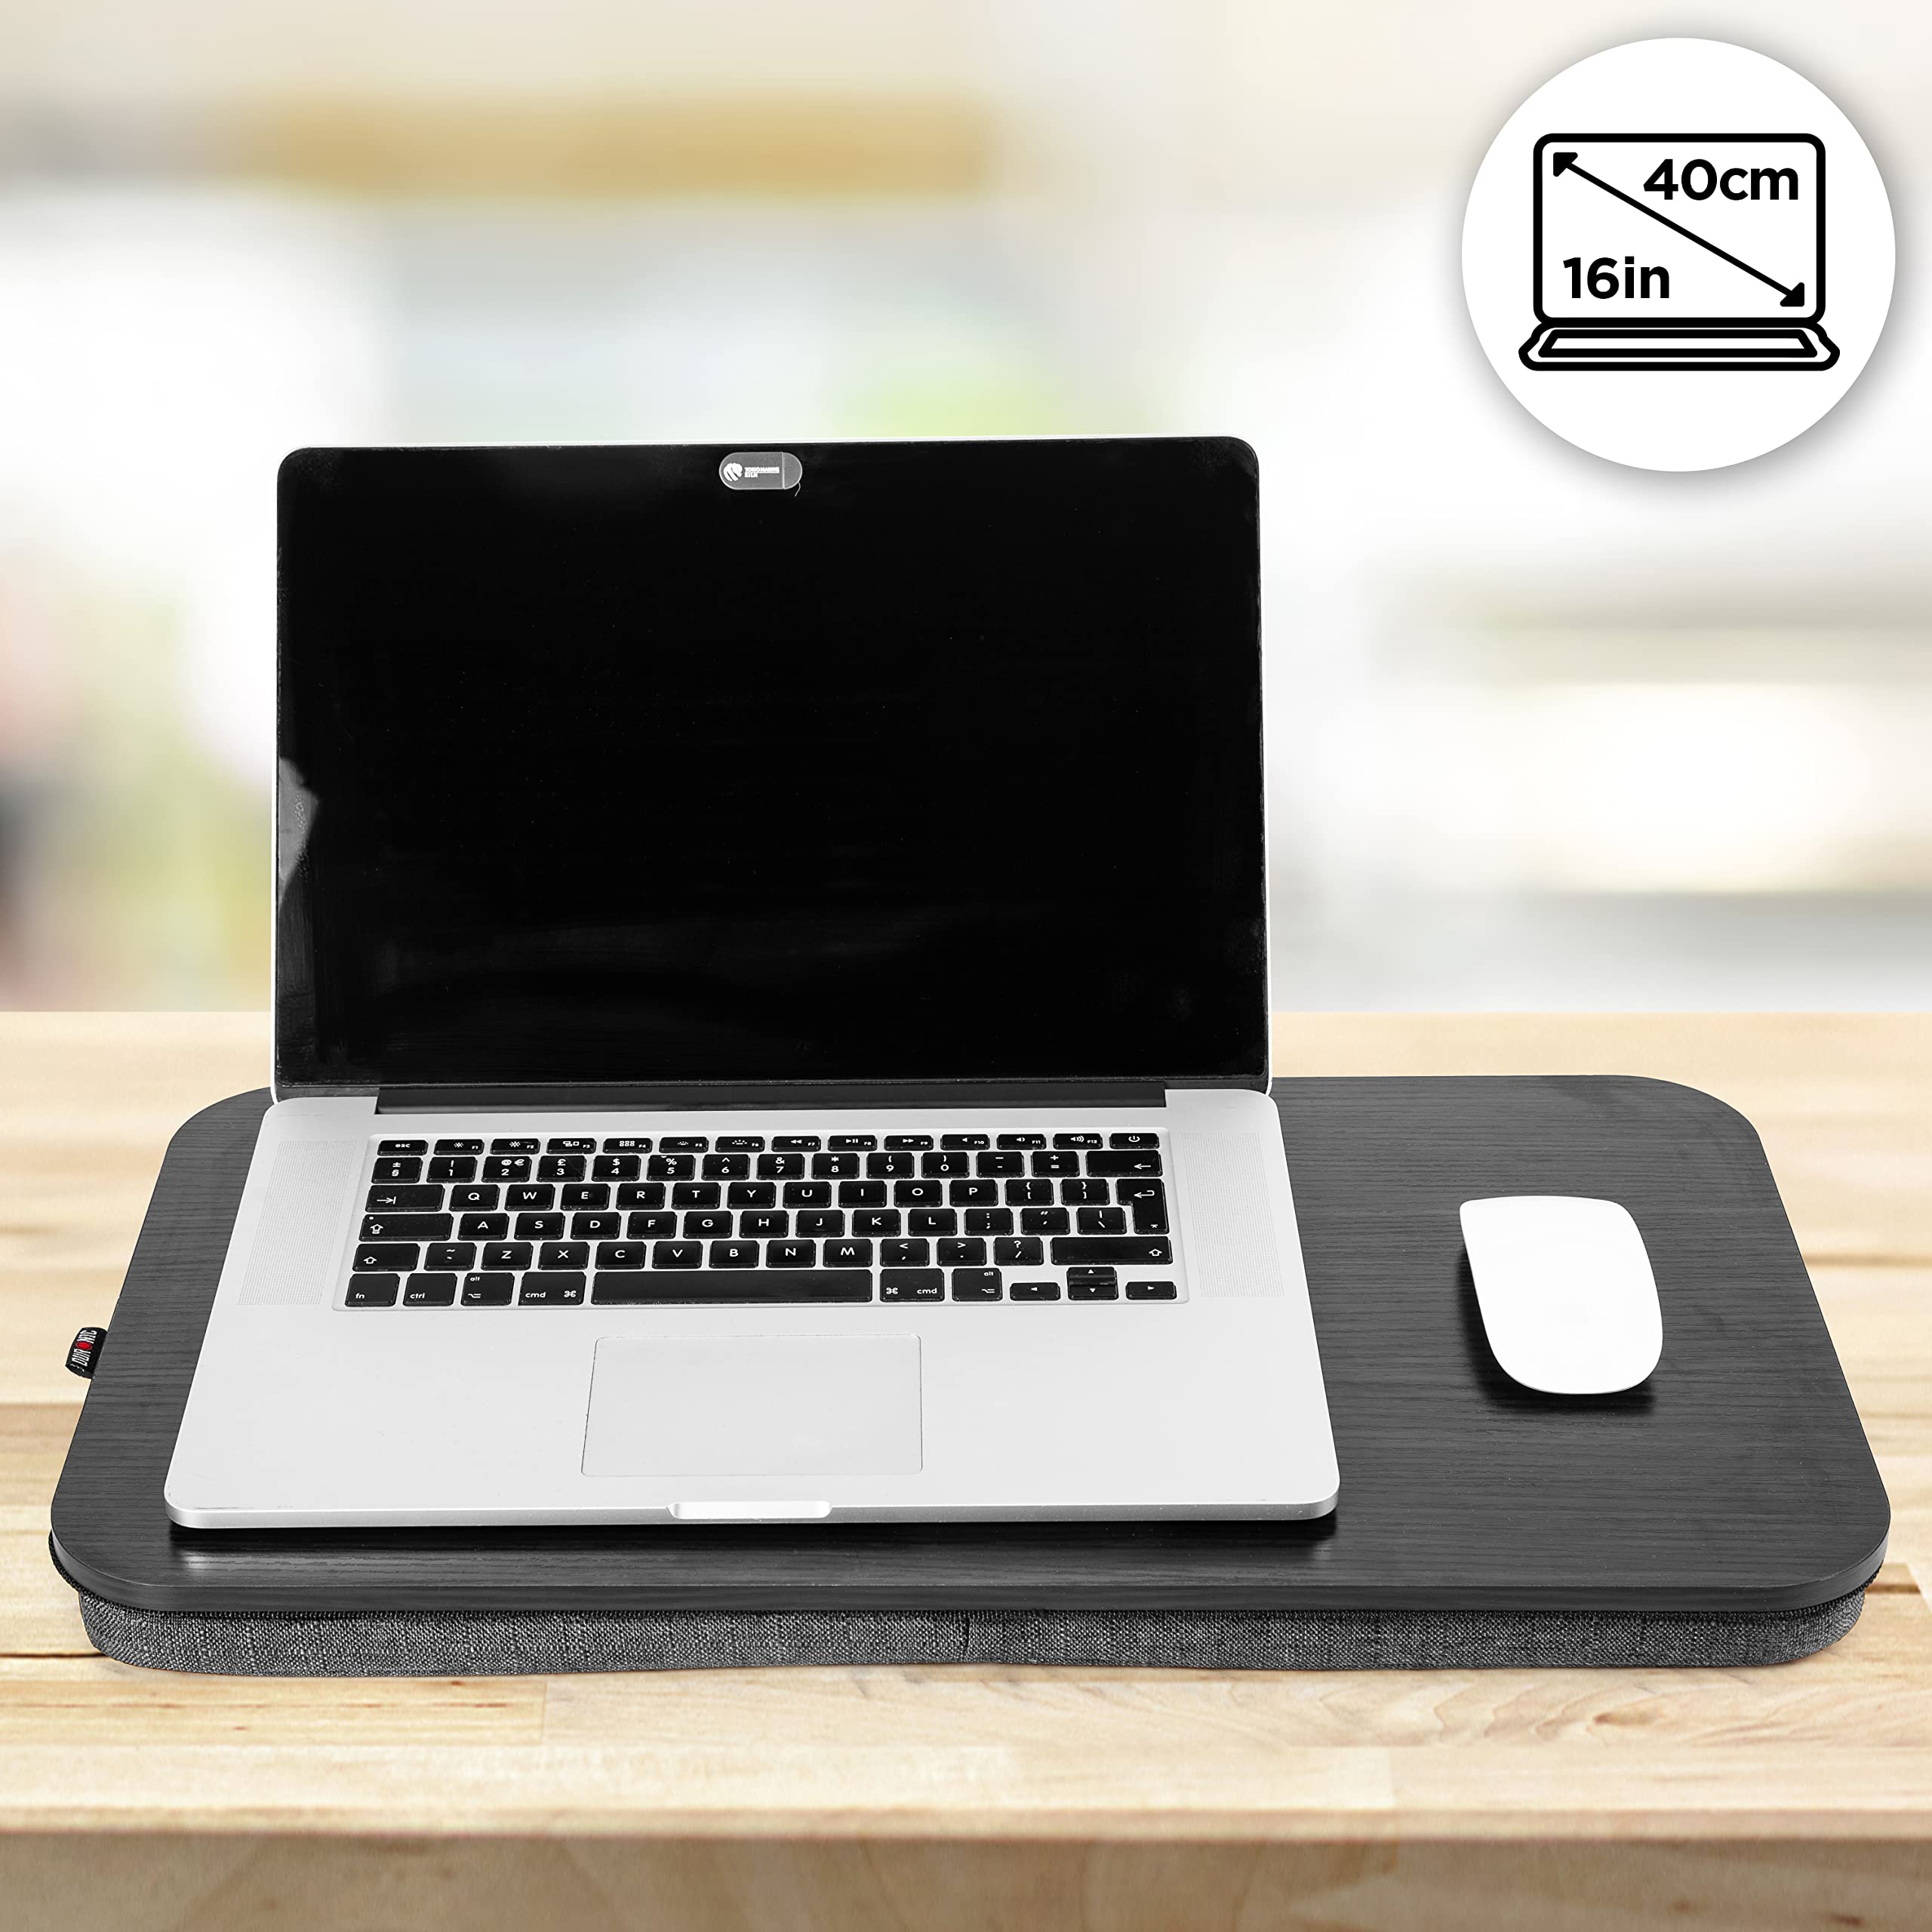 Duronic Laptop Tray with Cushion DML412 | Ergonomic Lap Desk for Bed, Sofa, Car | Large Flat Platform | Foam Cushion Support | Black | Portable Design with Carry Handle | For Home/Office